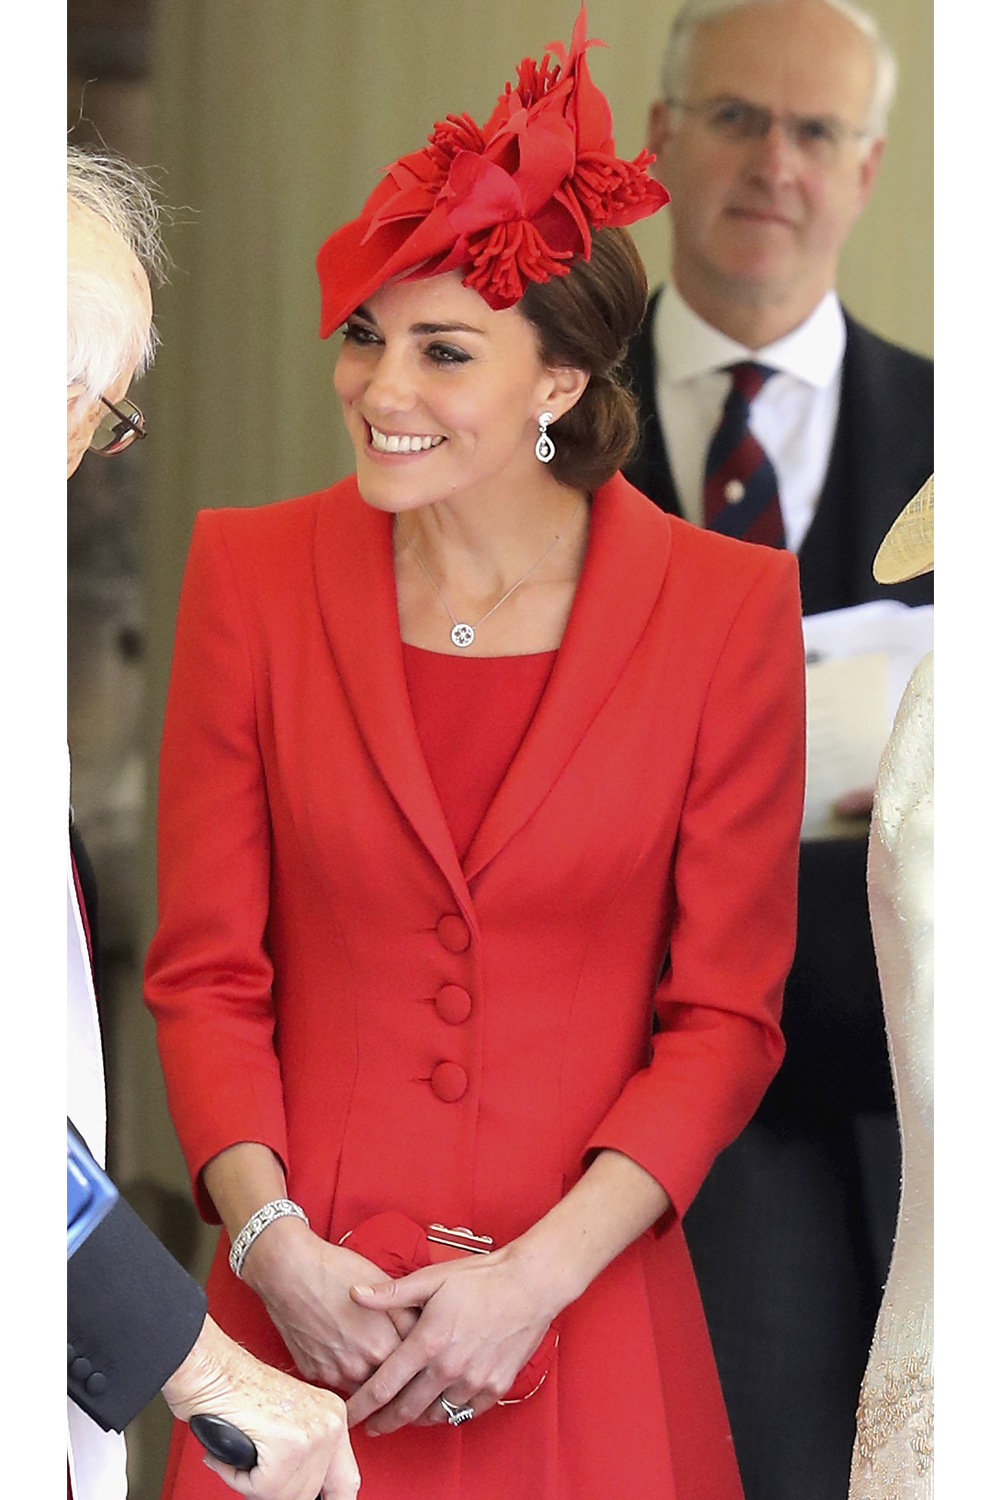 The Duchess of Cambridge in a red Catherine Walker coat at the Order of the Garter Service at Windsor Castle.